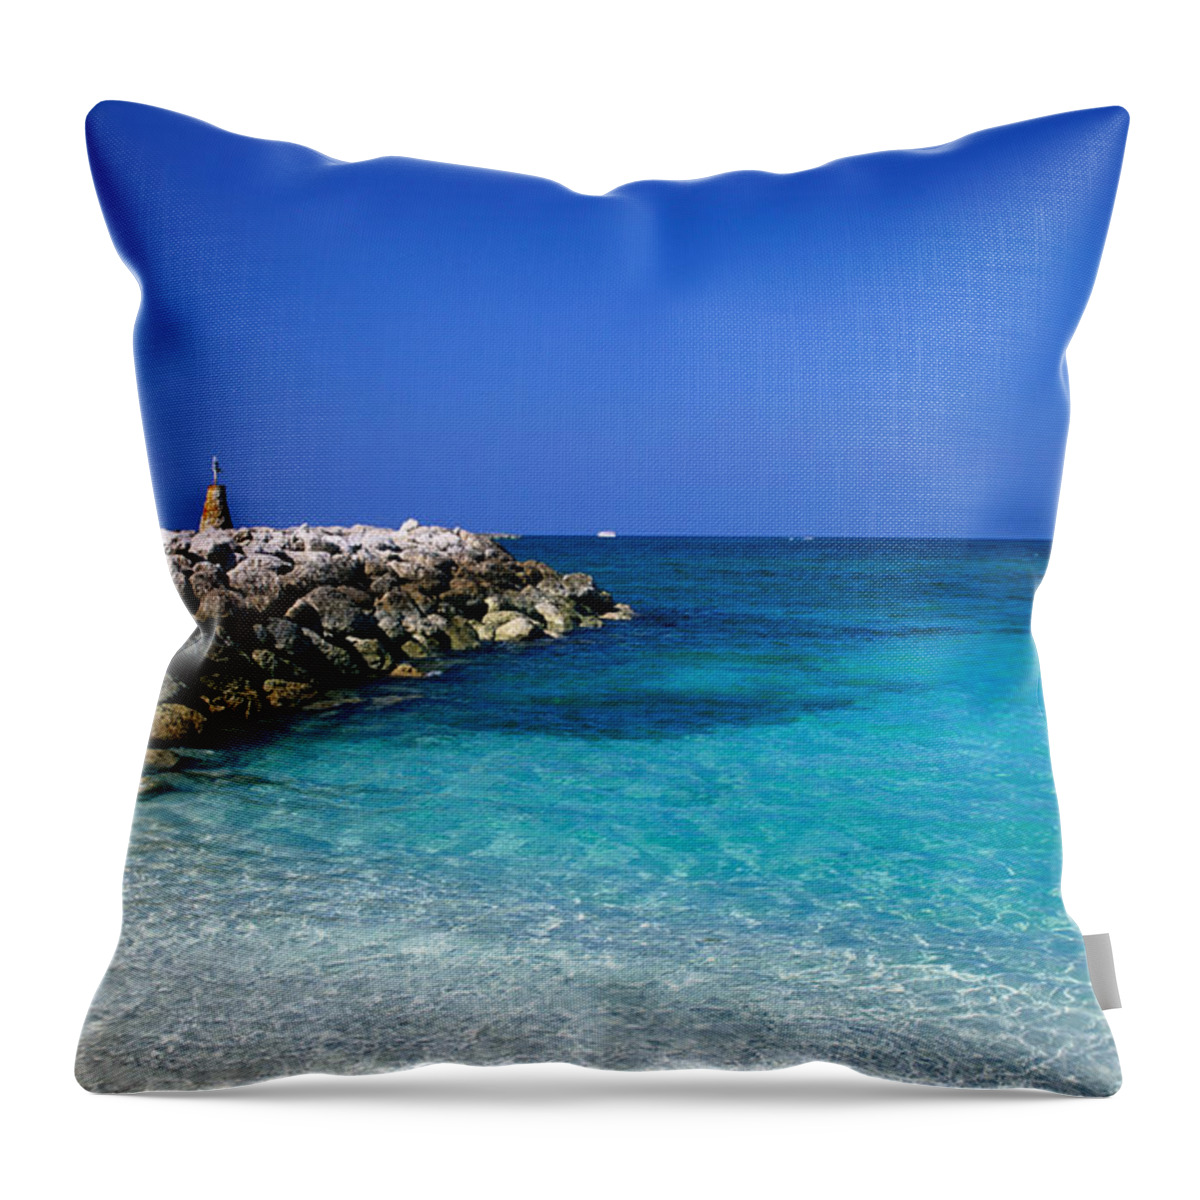 Outdoors Throw Pillow featuring the photograph Nassau Jetty With Beacon by Hisham Ibrahim